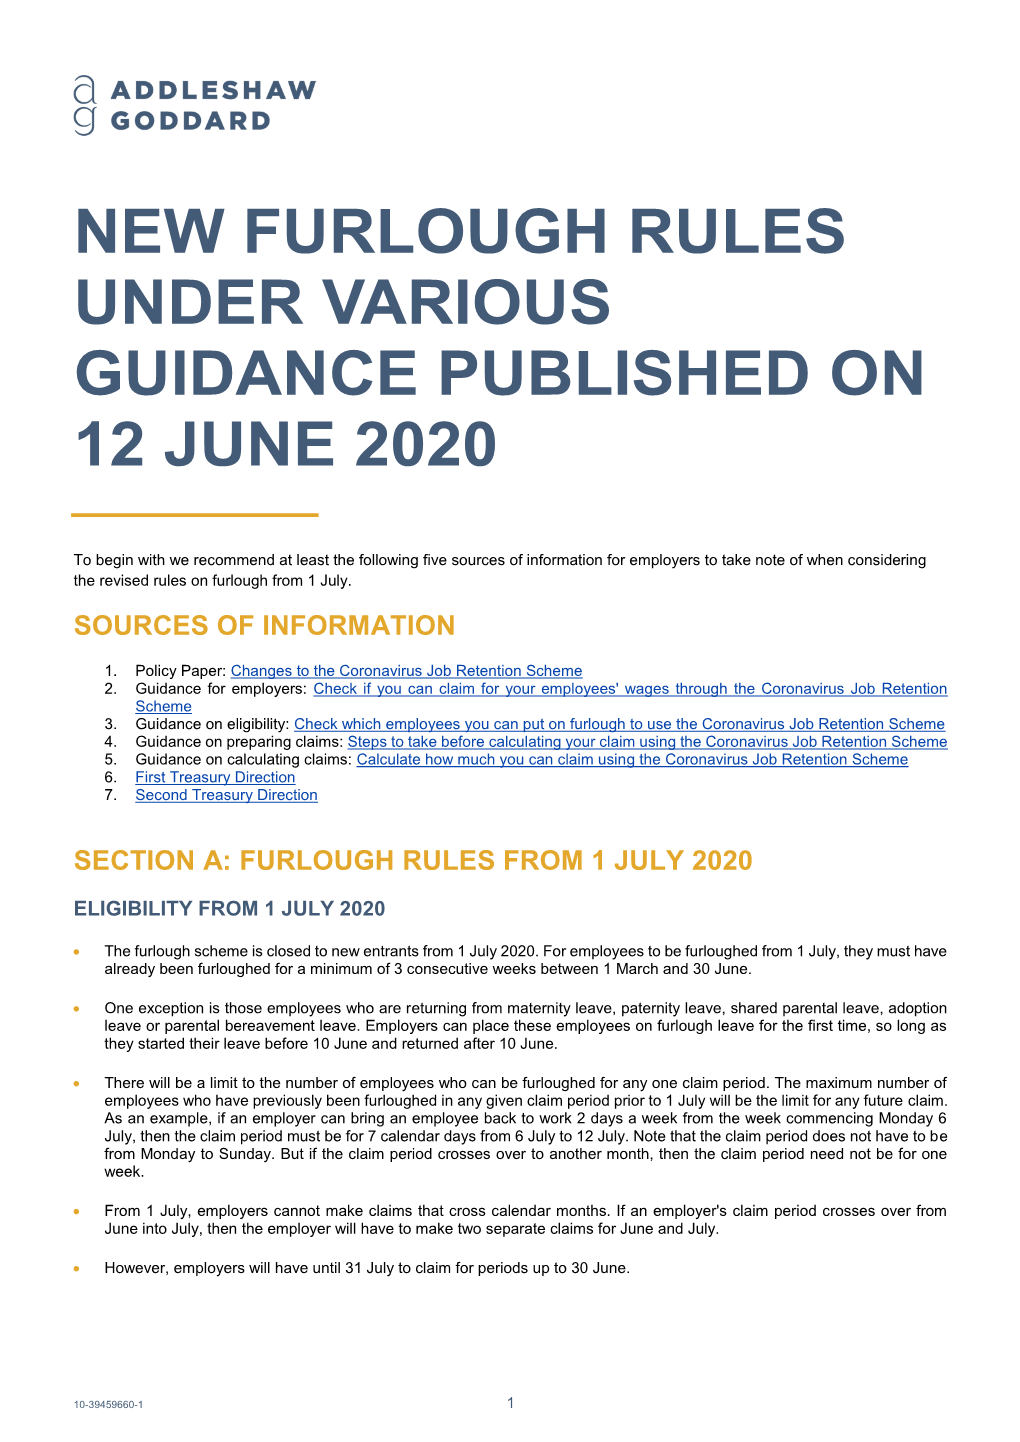 New Furlough Rules Under Various Guidance Published on 12 June 2020